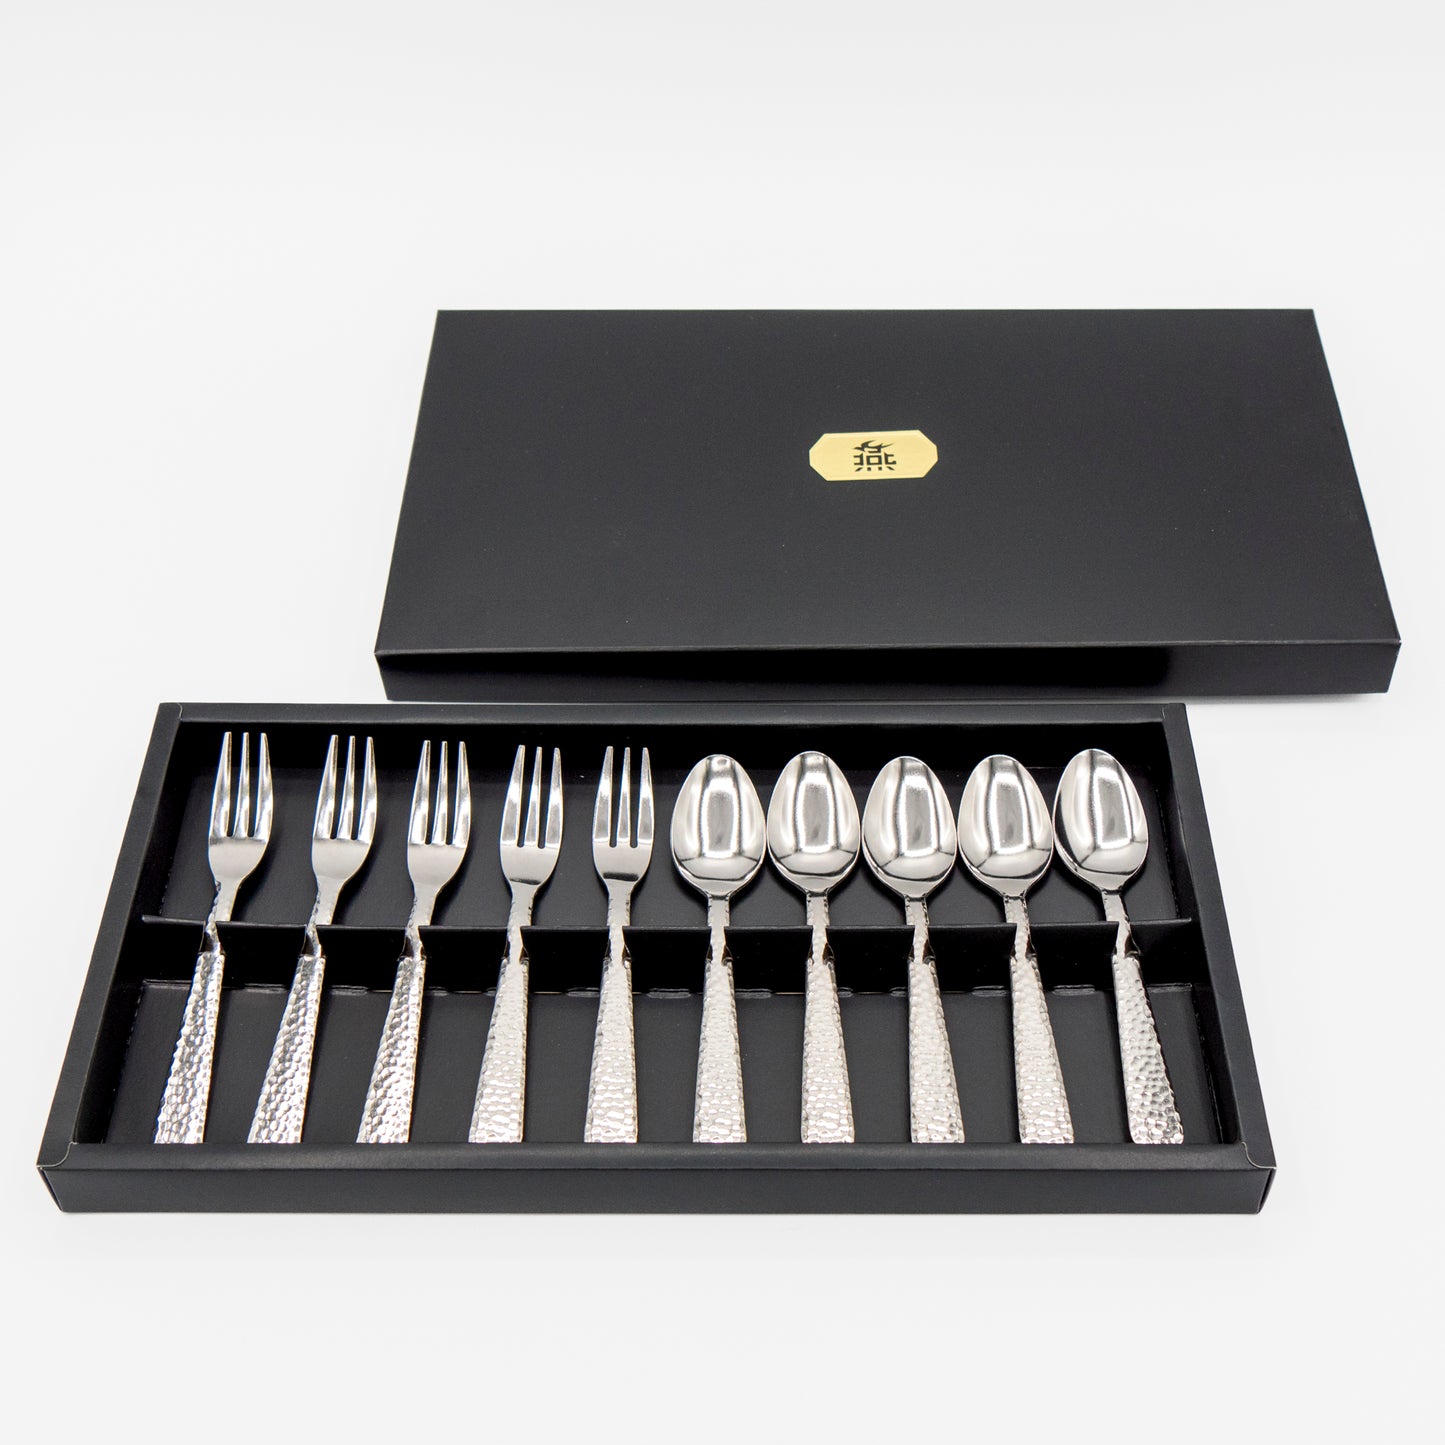 Japanese Cutlery Sets  - 10 Pieces